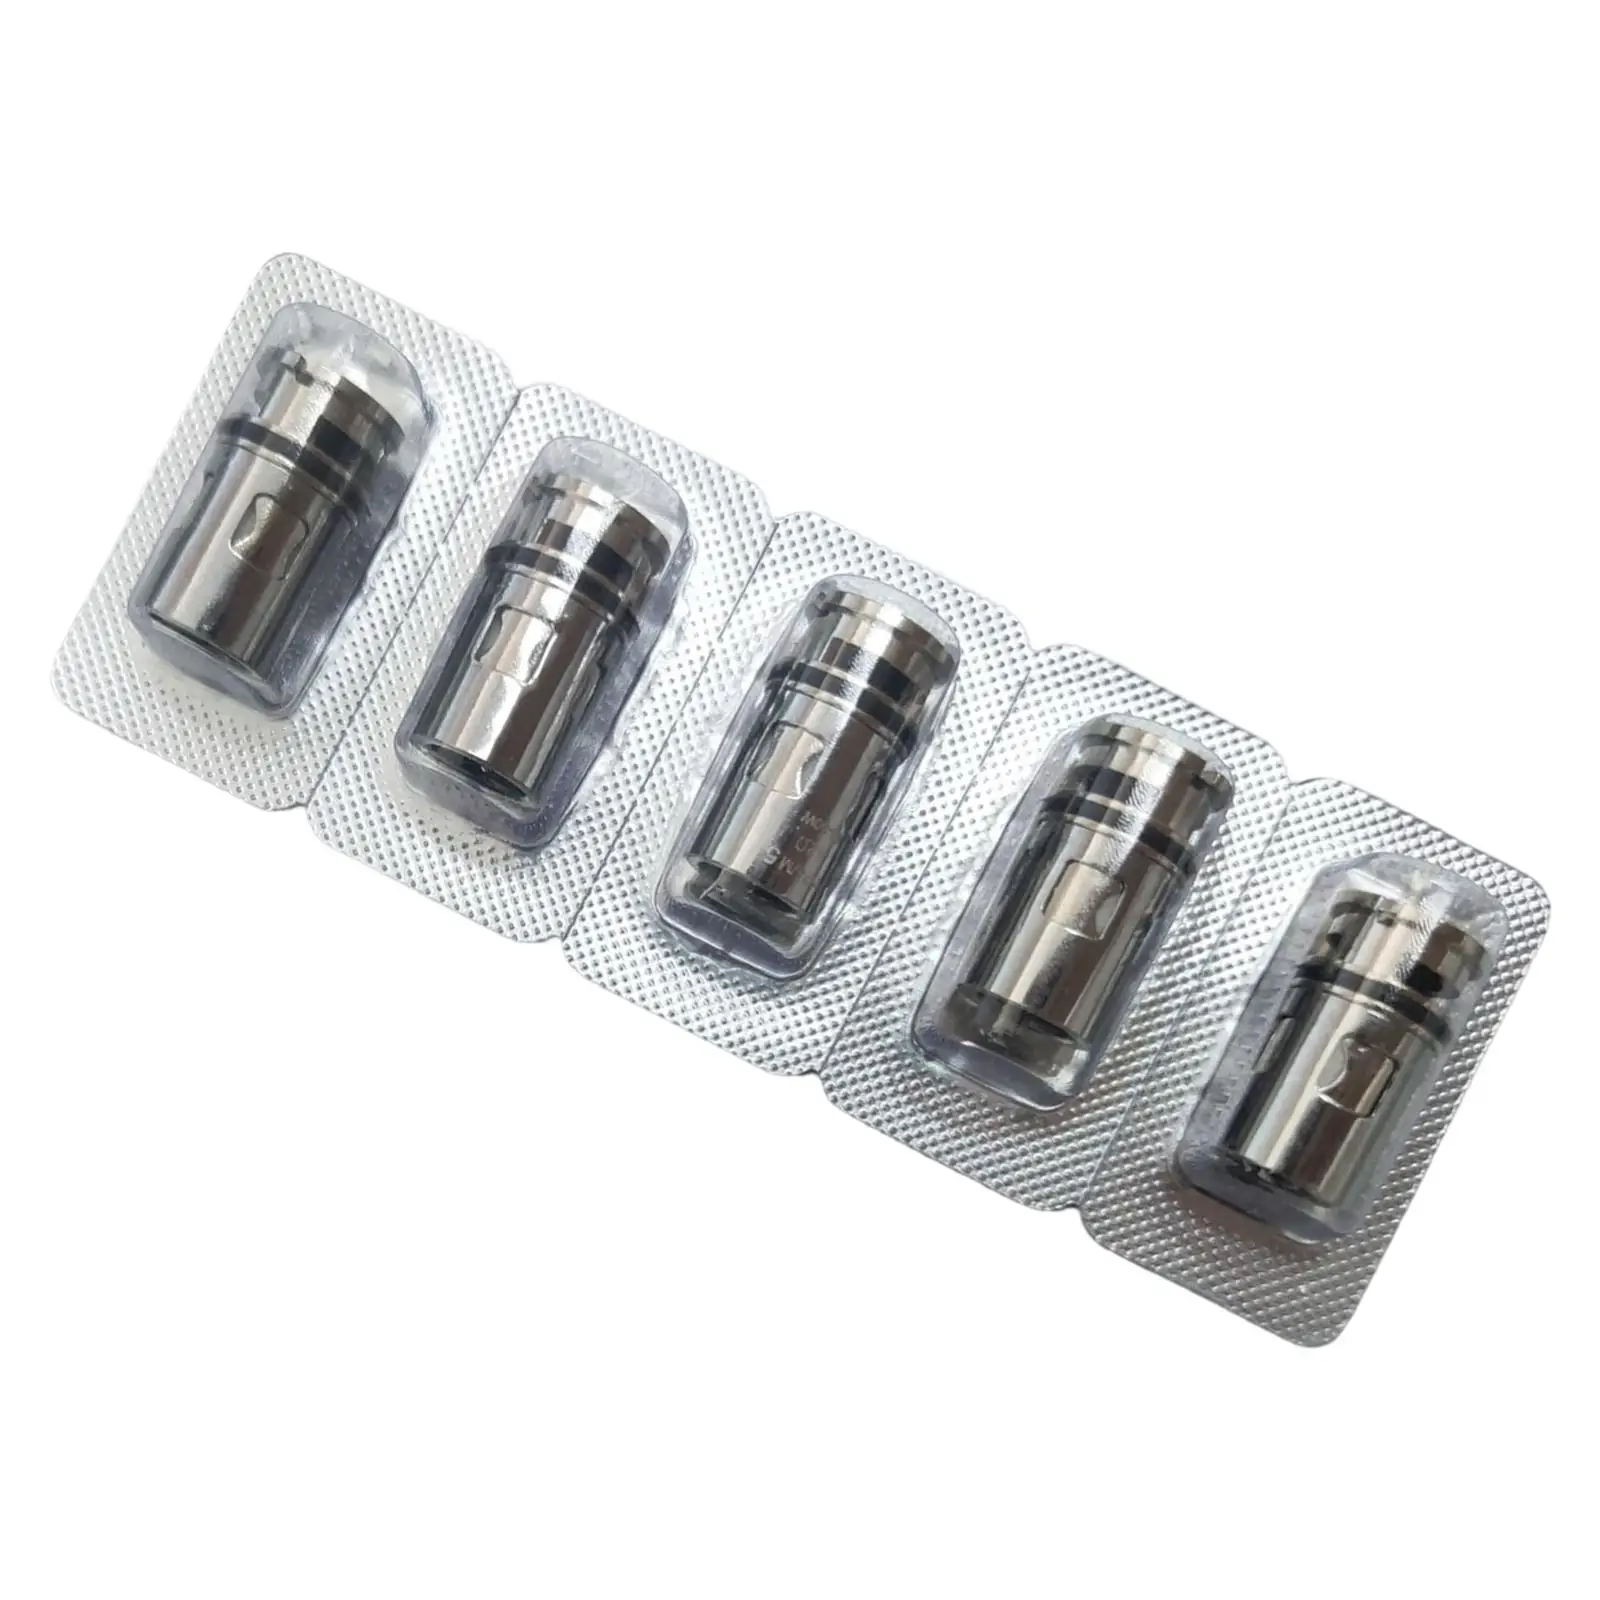 5Pcs PNP Coils Head Stainless Steel Durable Plug in Play Easy Use for Vinci Parts Accs